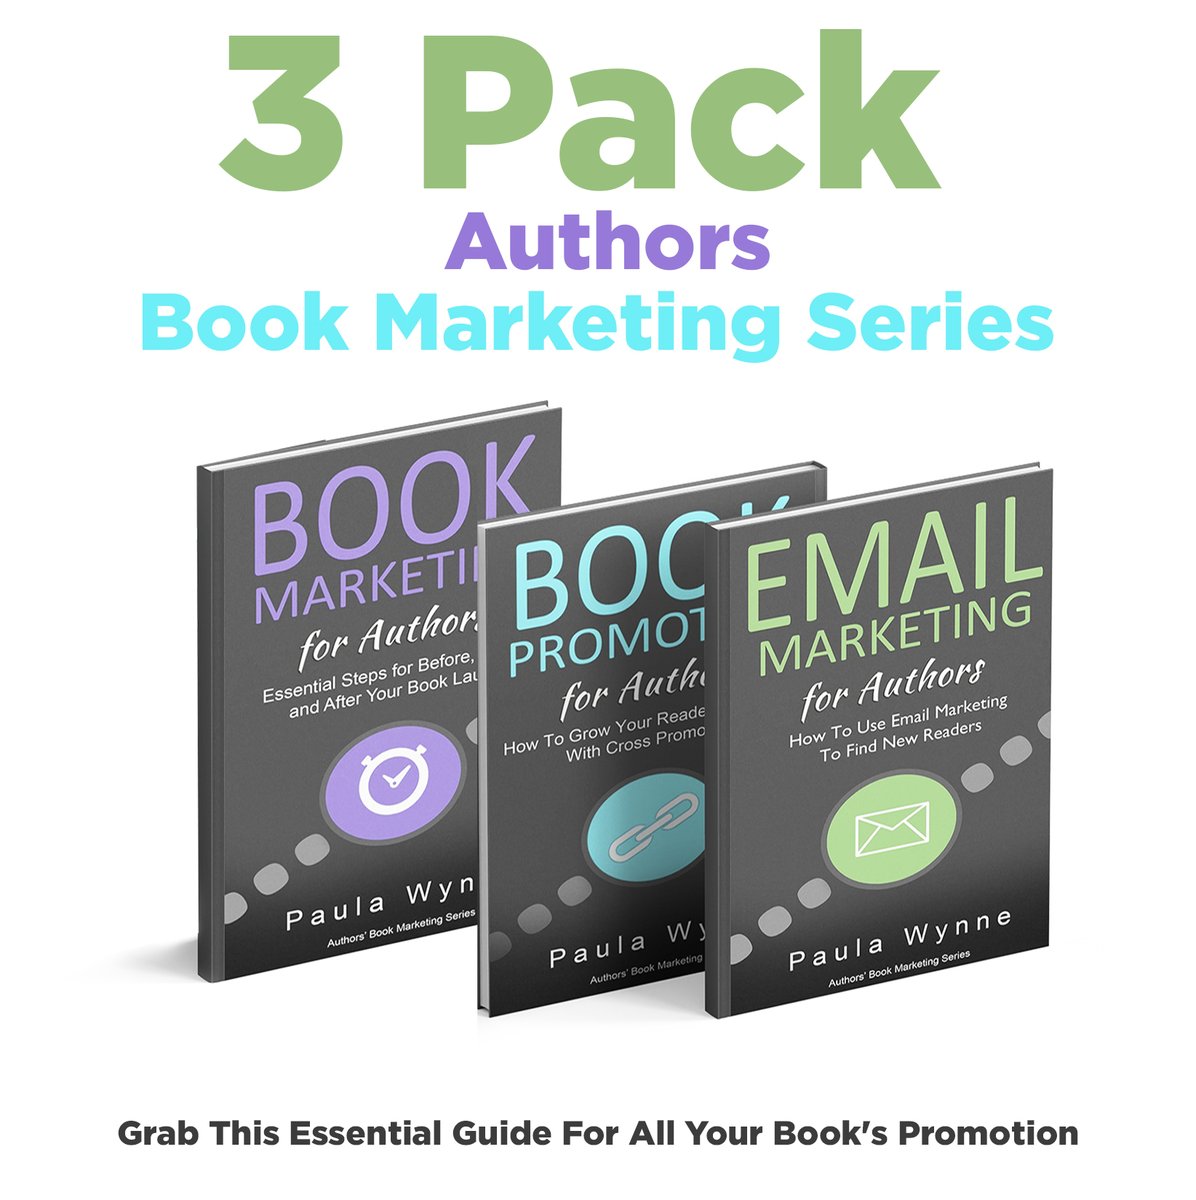 The Authors Book Marketing Series📚🎁

Hurry! Grab this #exclusive download now to avoid missing out on these vital book marketing resources 👉🏻 pageturnerawards.com/download-freeb…

#bookmarketing #bookmarketing #bookseries #freedownload #freebookmarketing #freebook #freebooks #writer #author